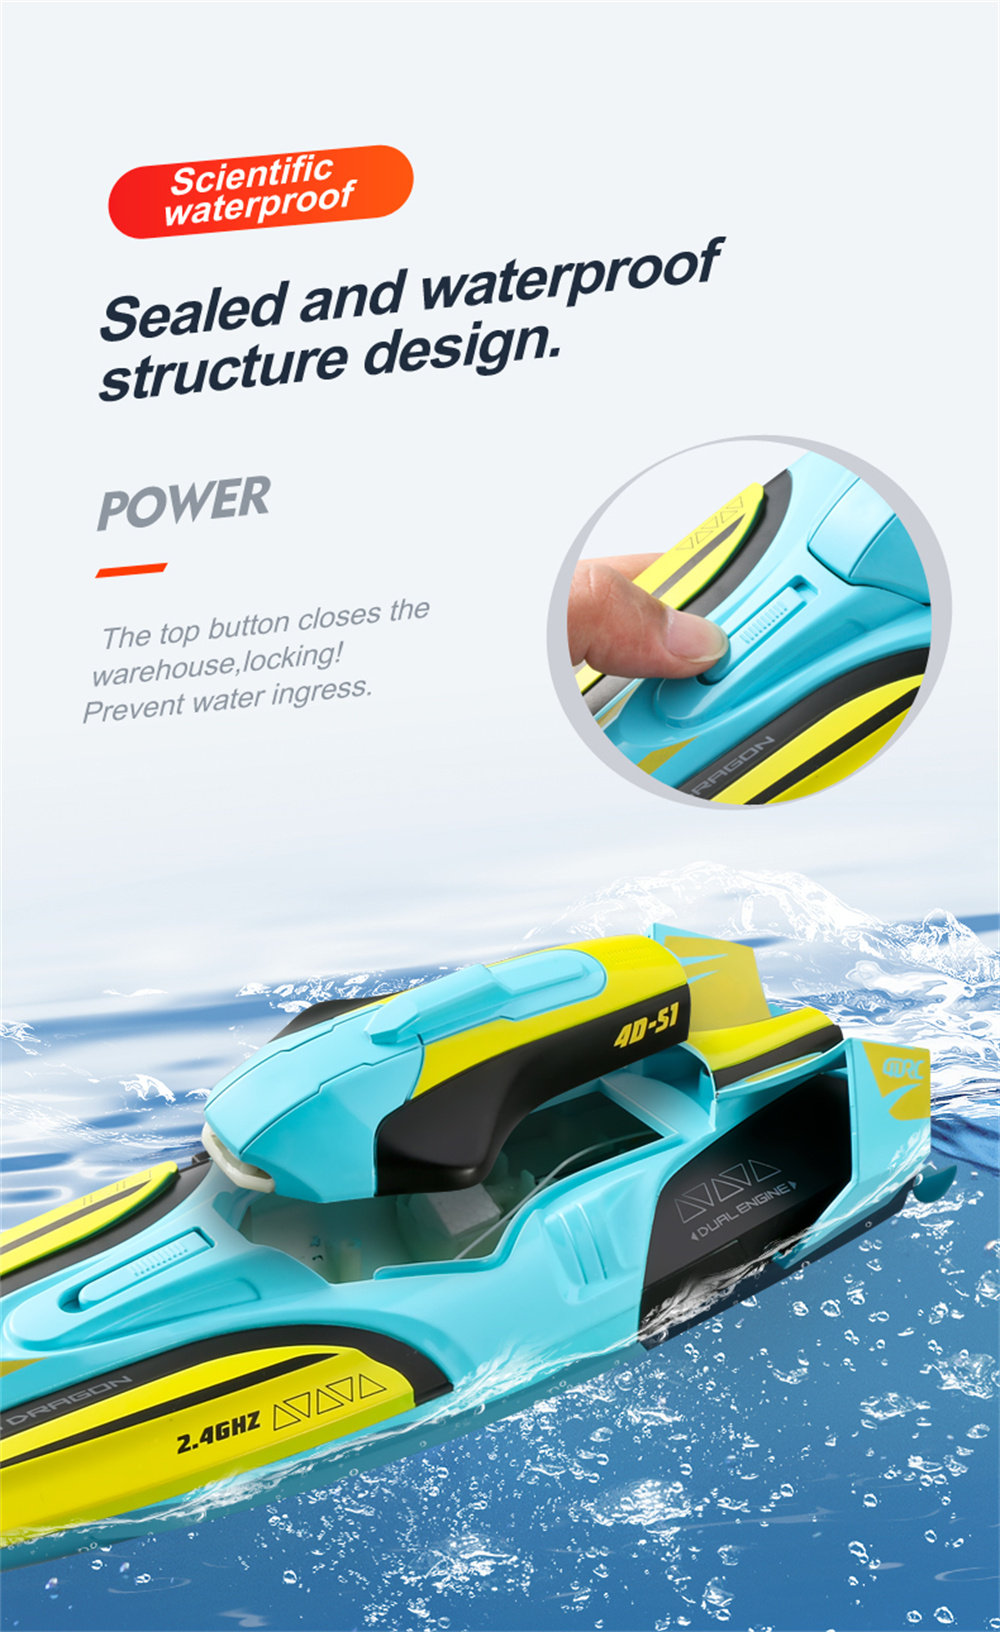 4DRC S1 2.4G 4CH RC Boat Fast High Speed Water Model Remote Control Toys RTR Pools Lakes Racing Kids Children Gift